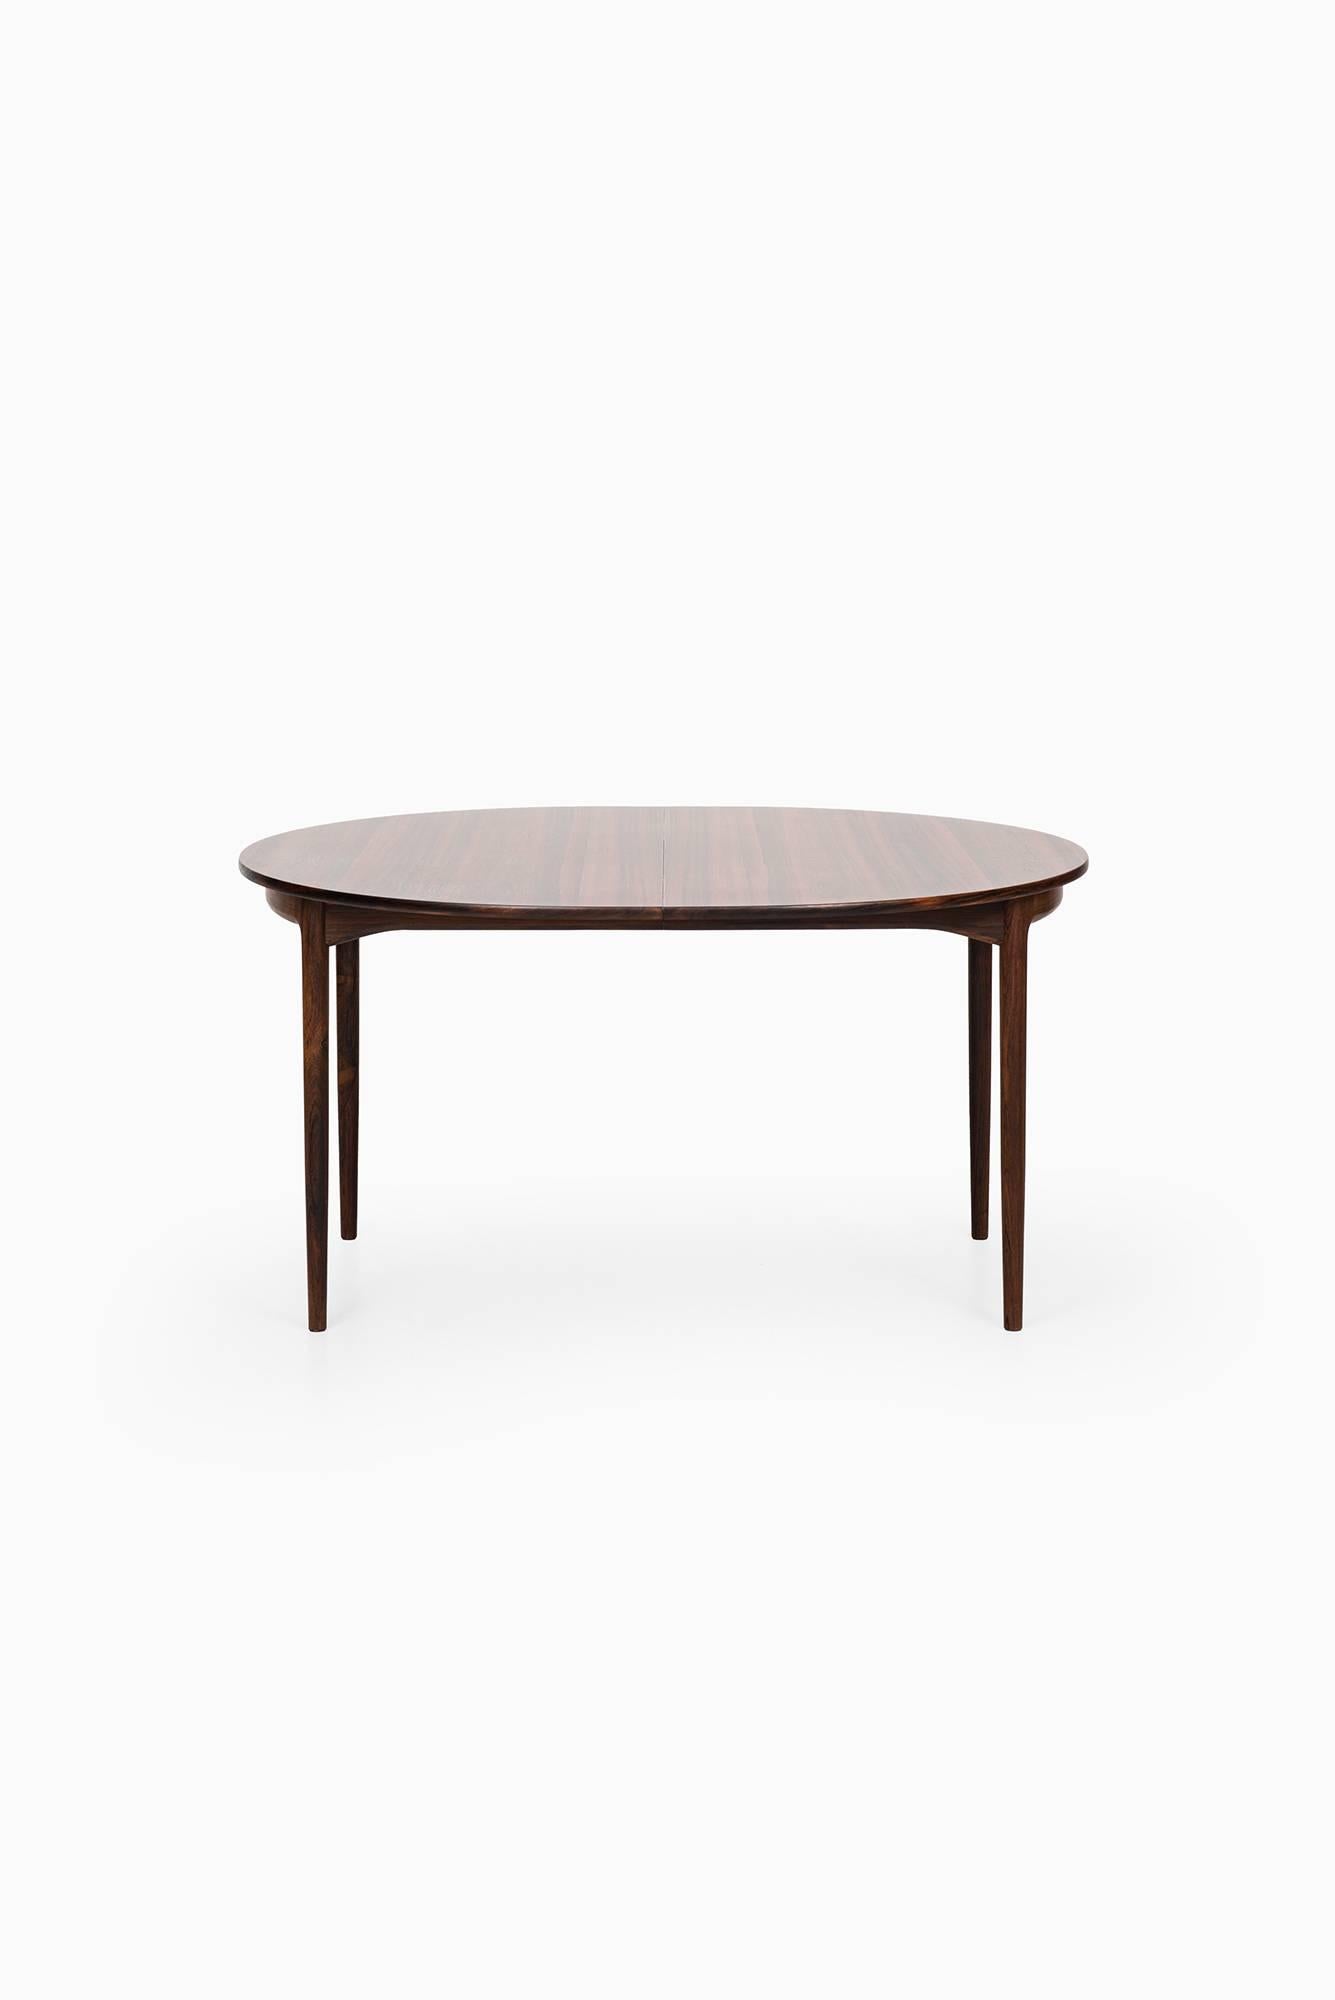 Very rare dining table designed by Ib Kofod-Larsen. Produced by Seffle Möbelfabrik in Sweden.